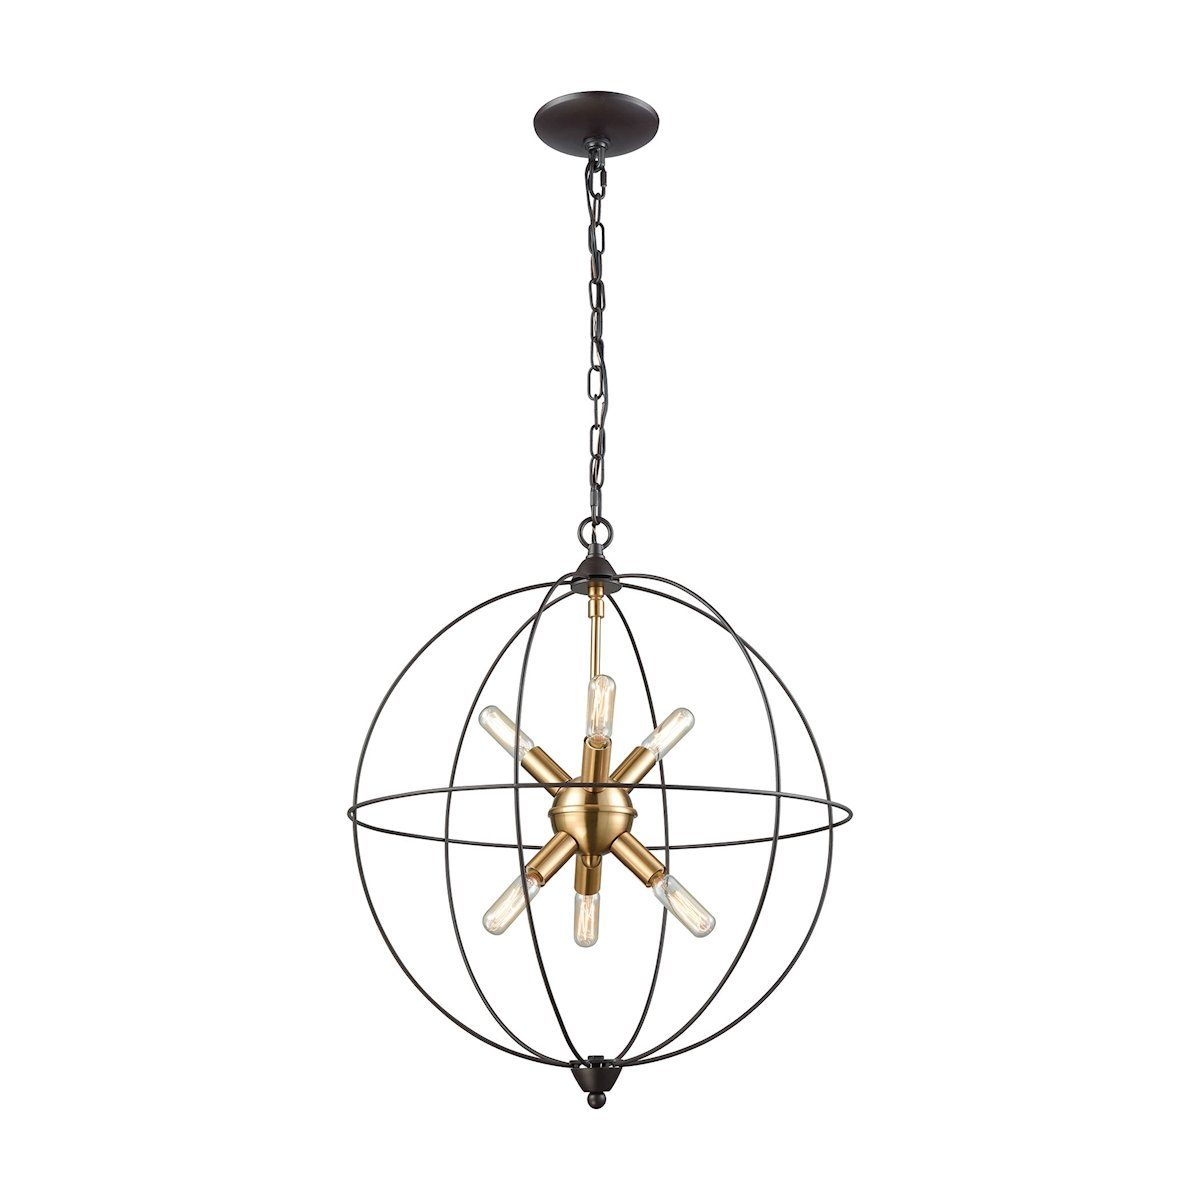 Loftin 6 Light Chandelier In Oil Rubbed Bronze With Satin Brass Accents Ceiling Elk Lighting 